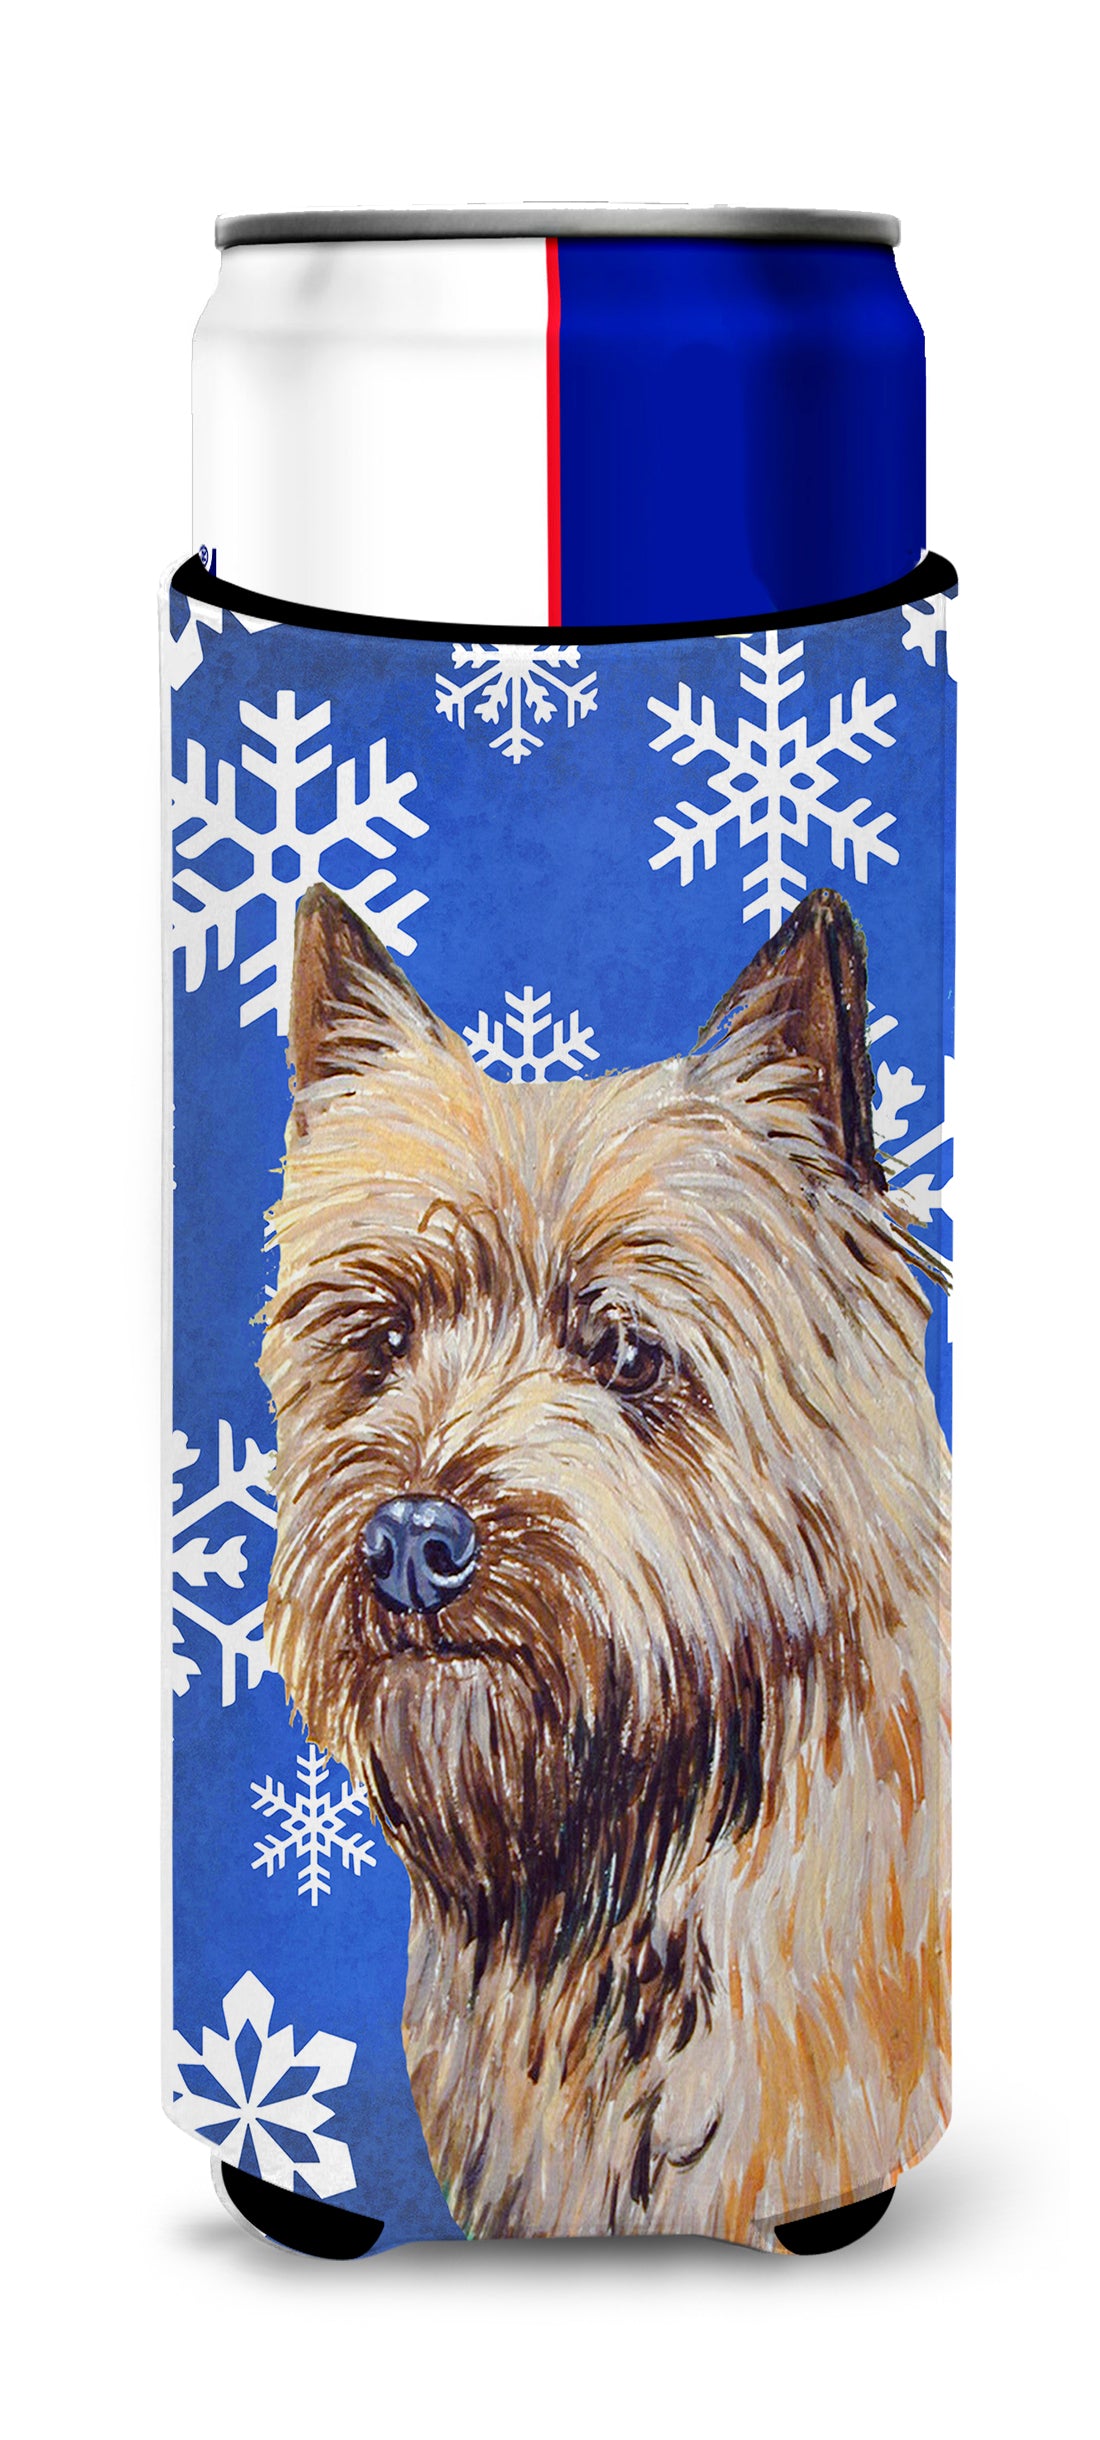 Cairn Terrier Winter Snowflakes Holiday Ultra Beverage Insulators for slim cans LH9275MUK